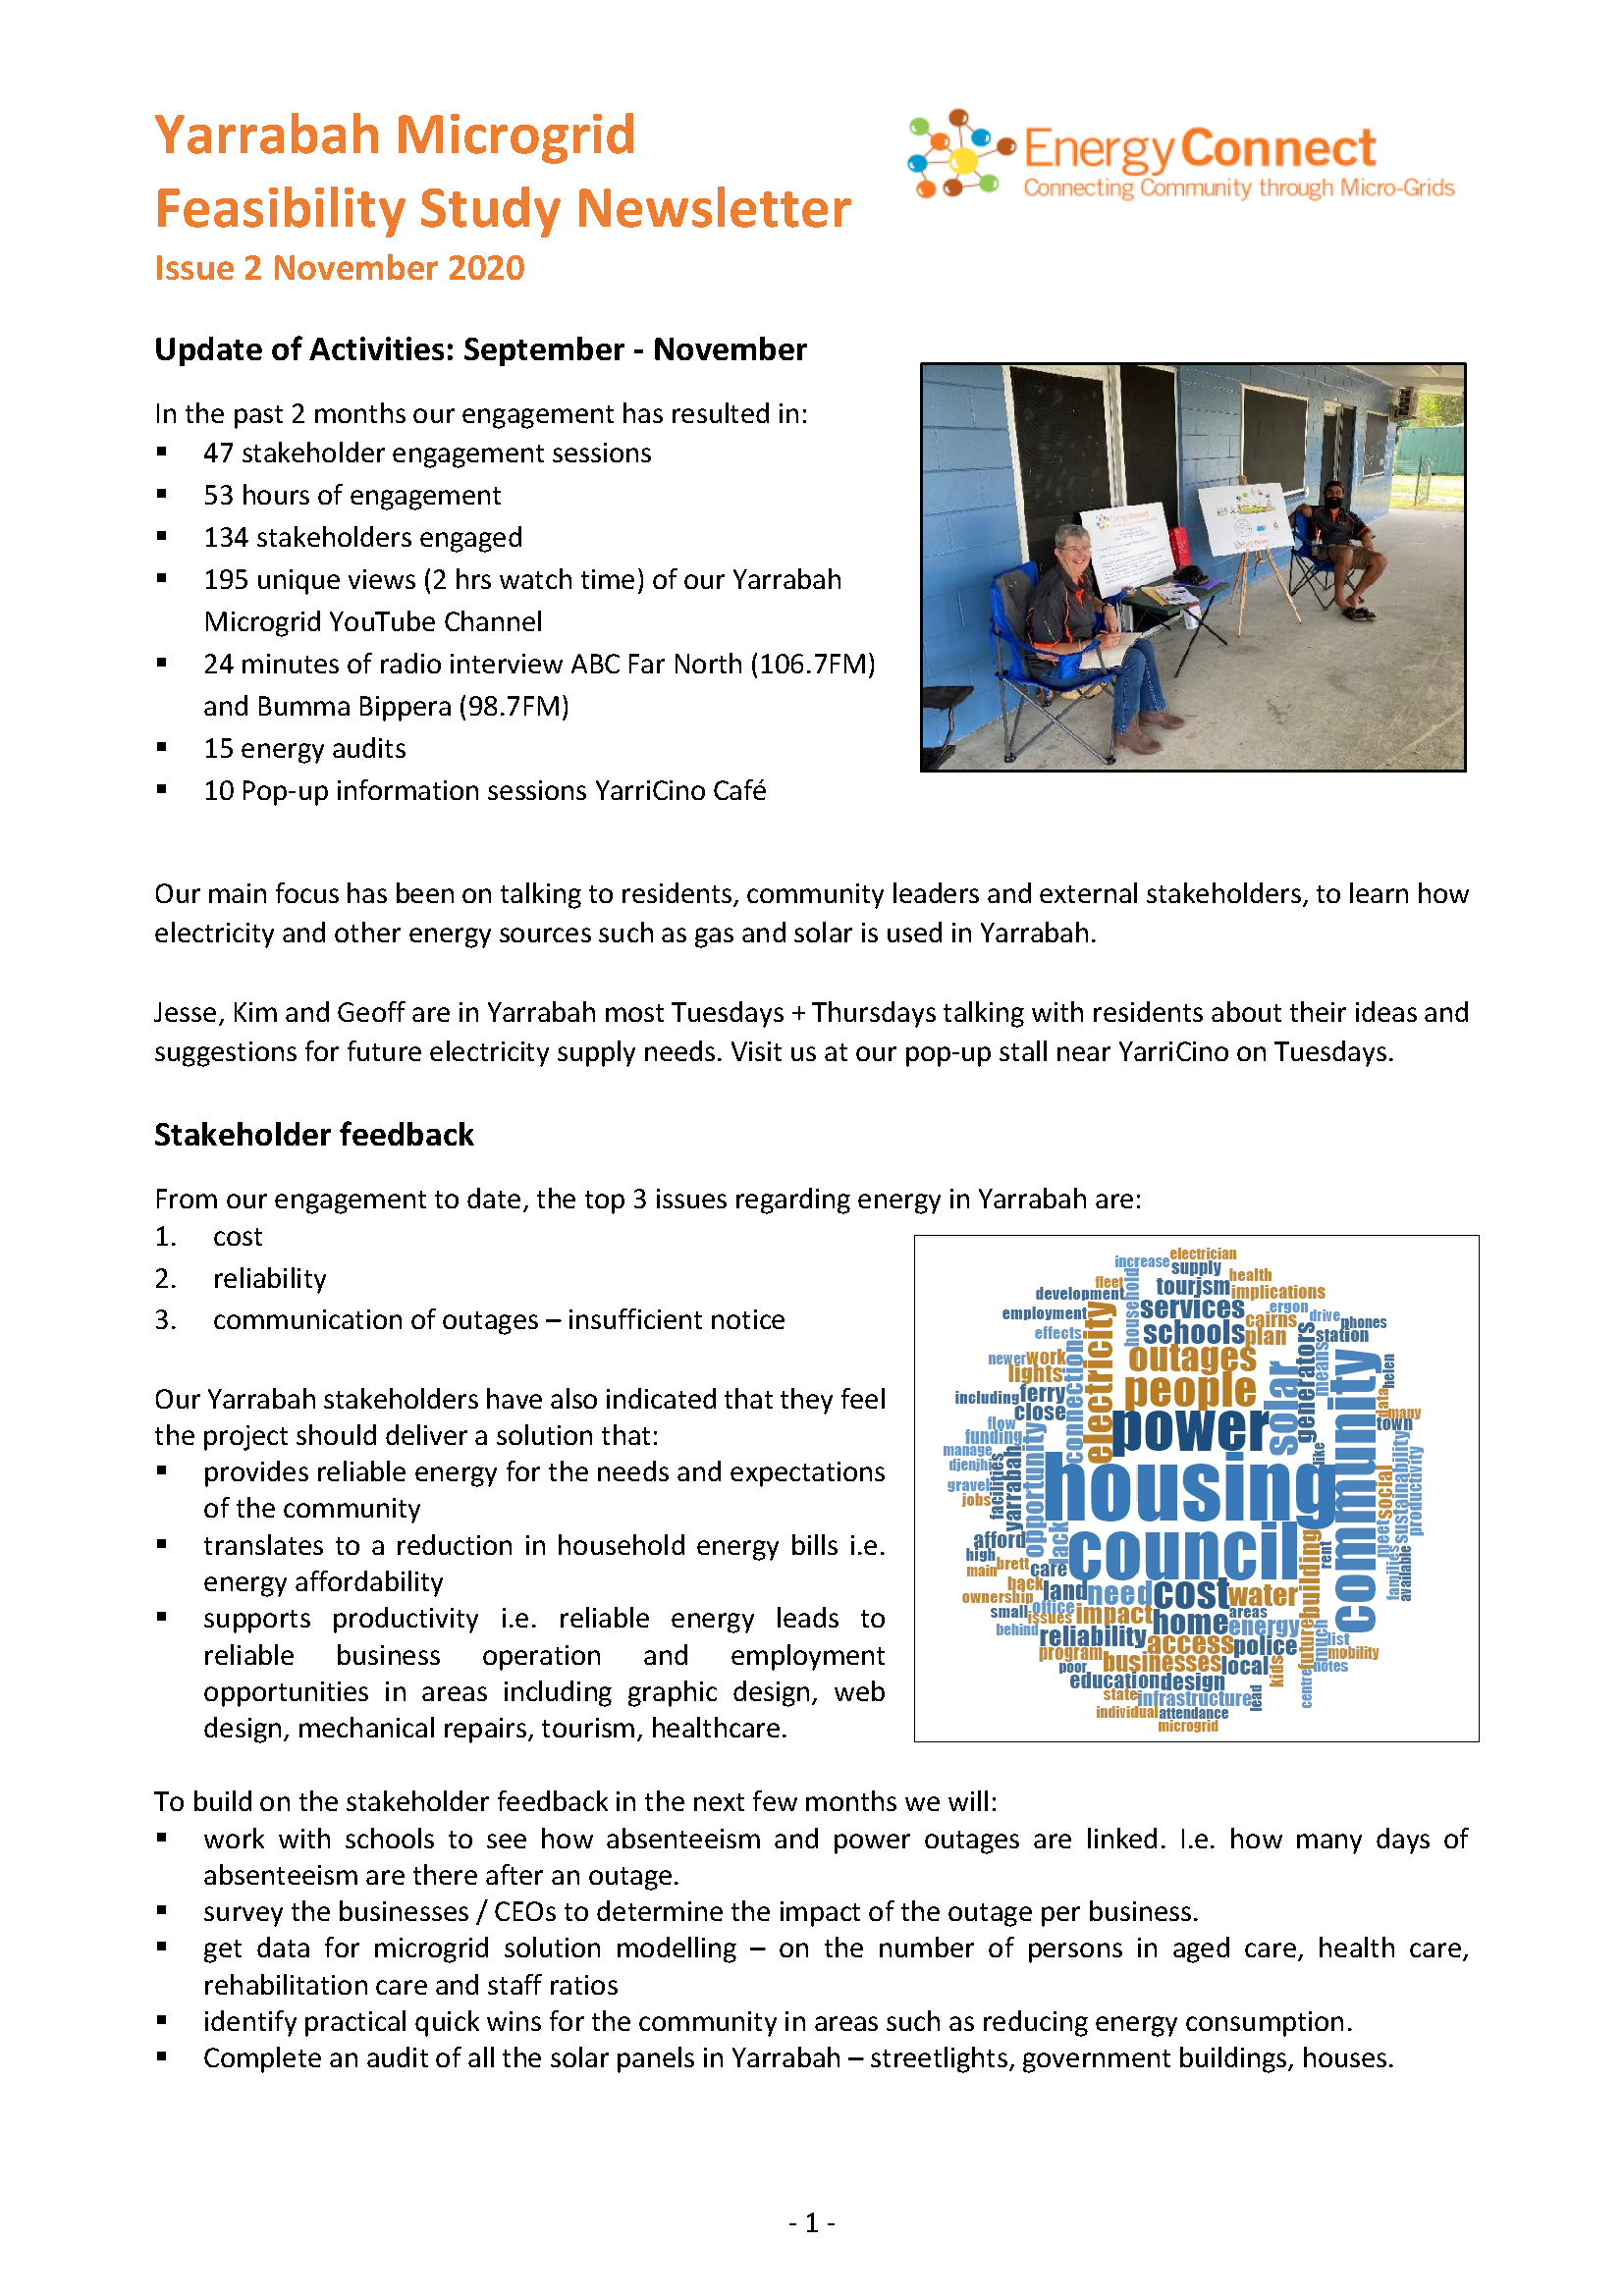 EnergyConnect - Yarrabah Microgrid Newsletter - Issue 2